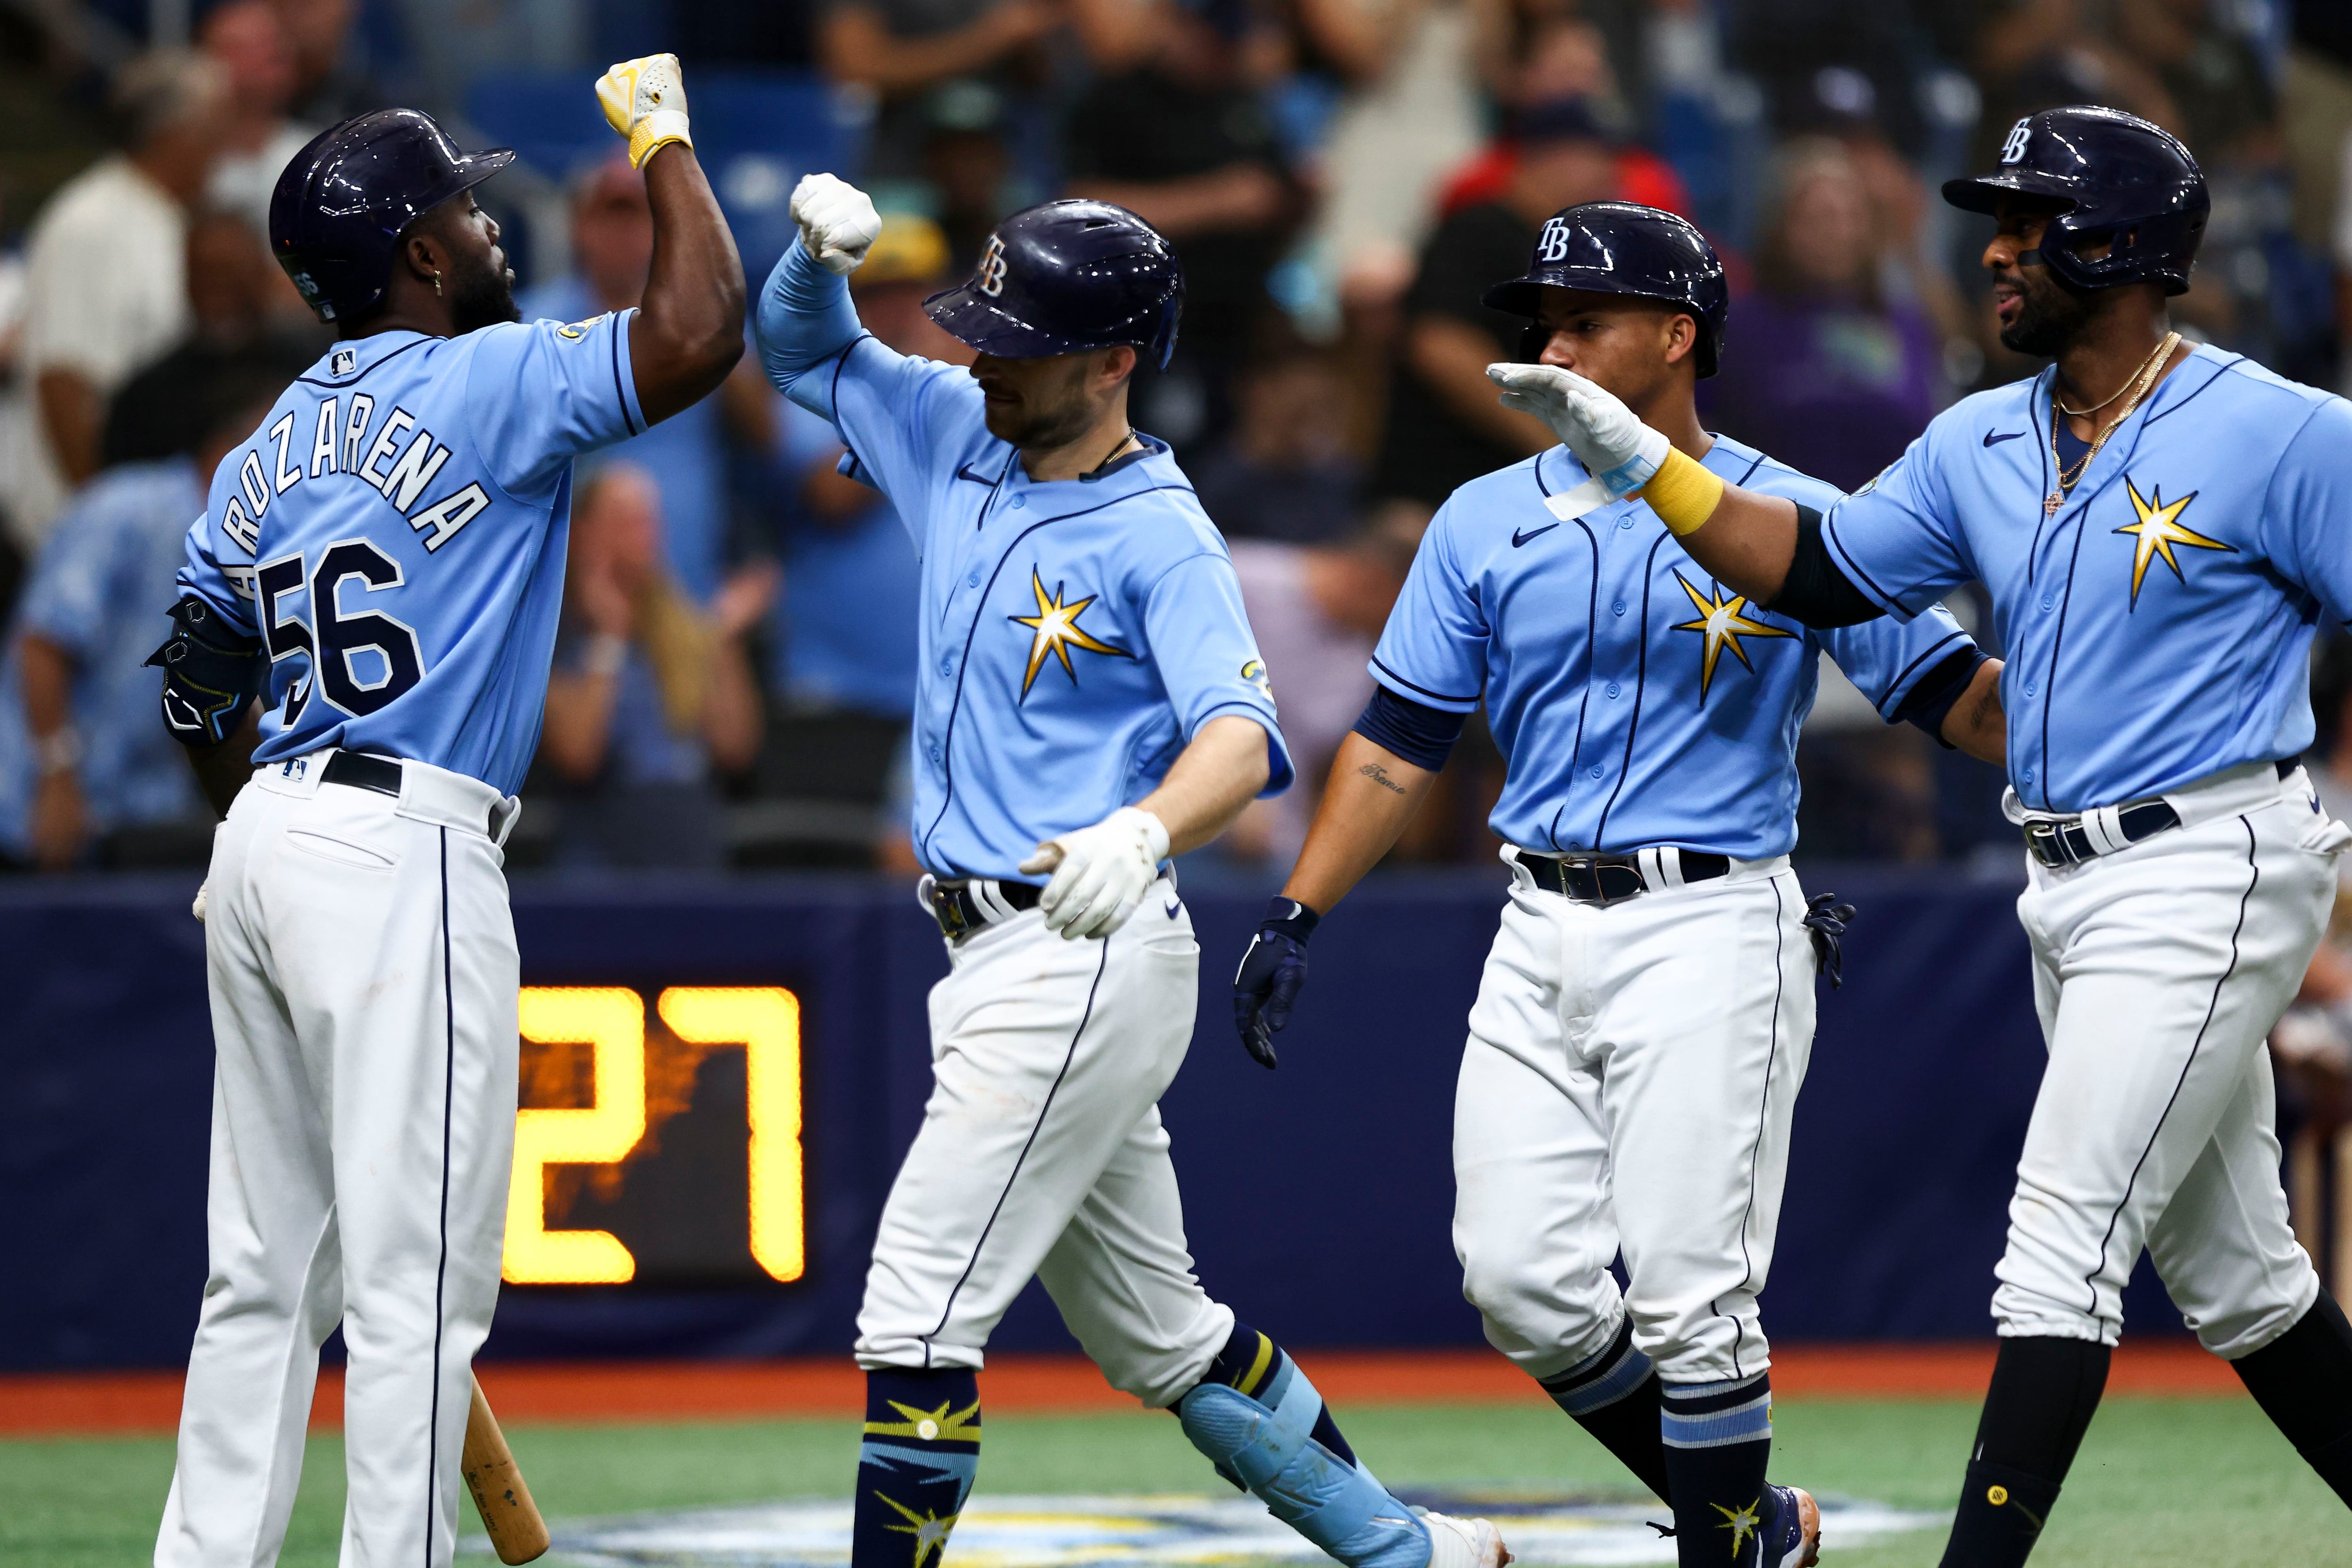 Rays complete sweep of Marlins with 7-2 win